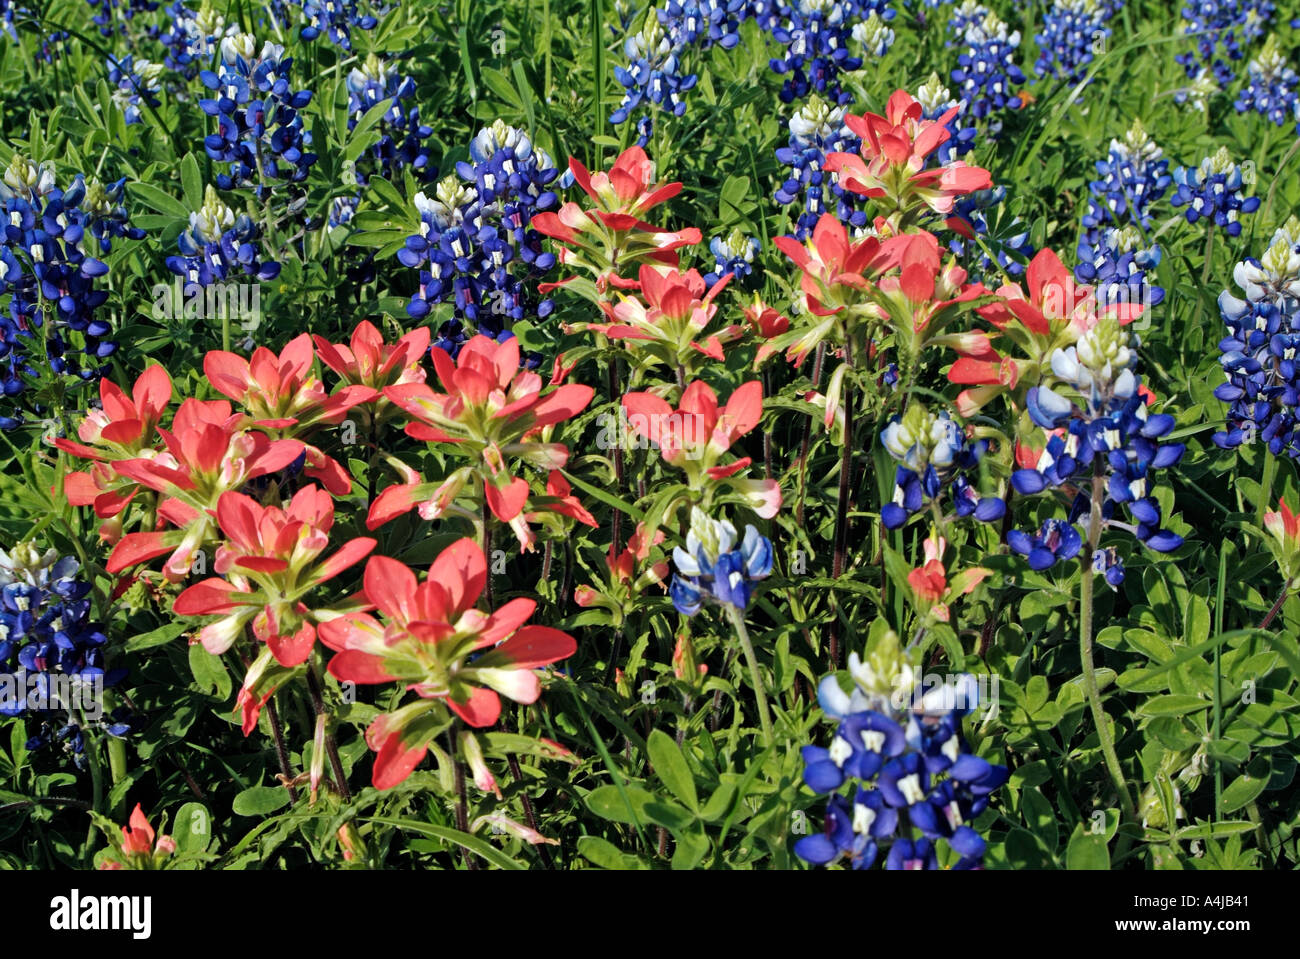 Bluebonnet and Texas paintbrush flowers in Texas Stock Photo